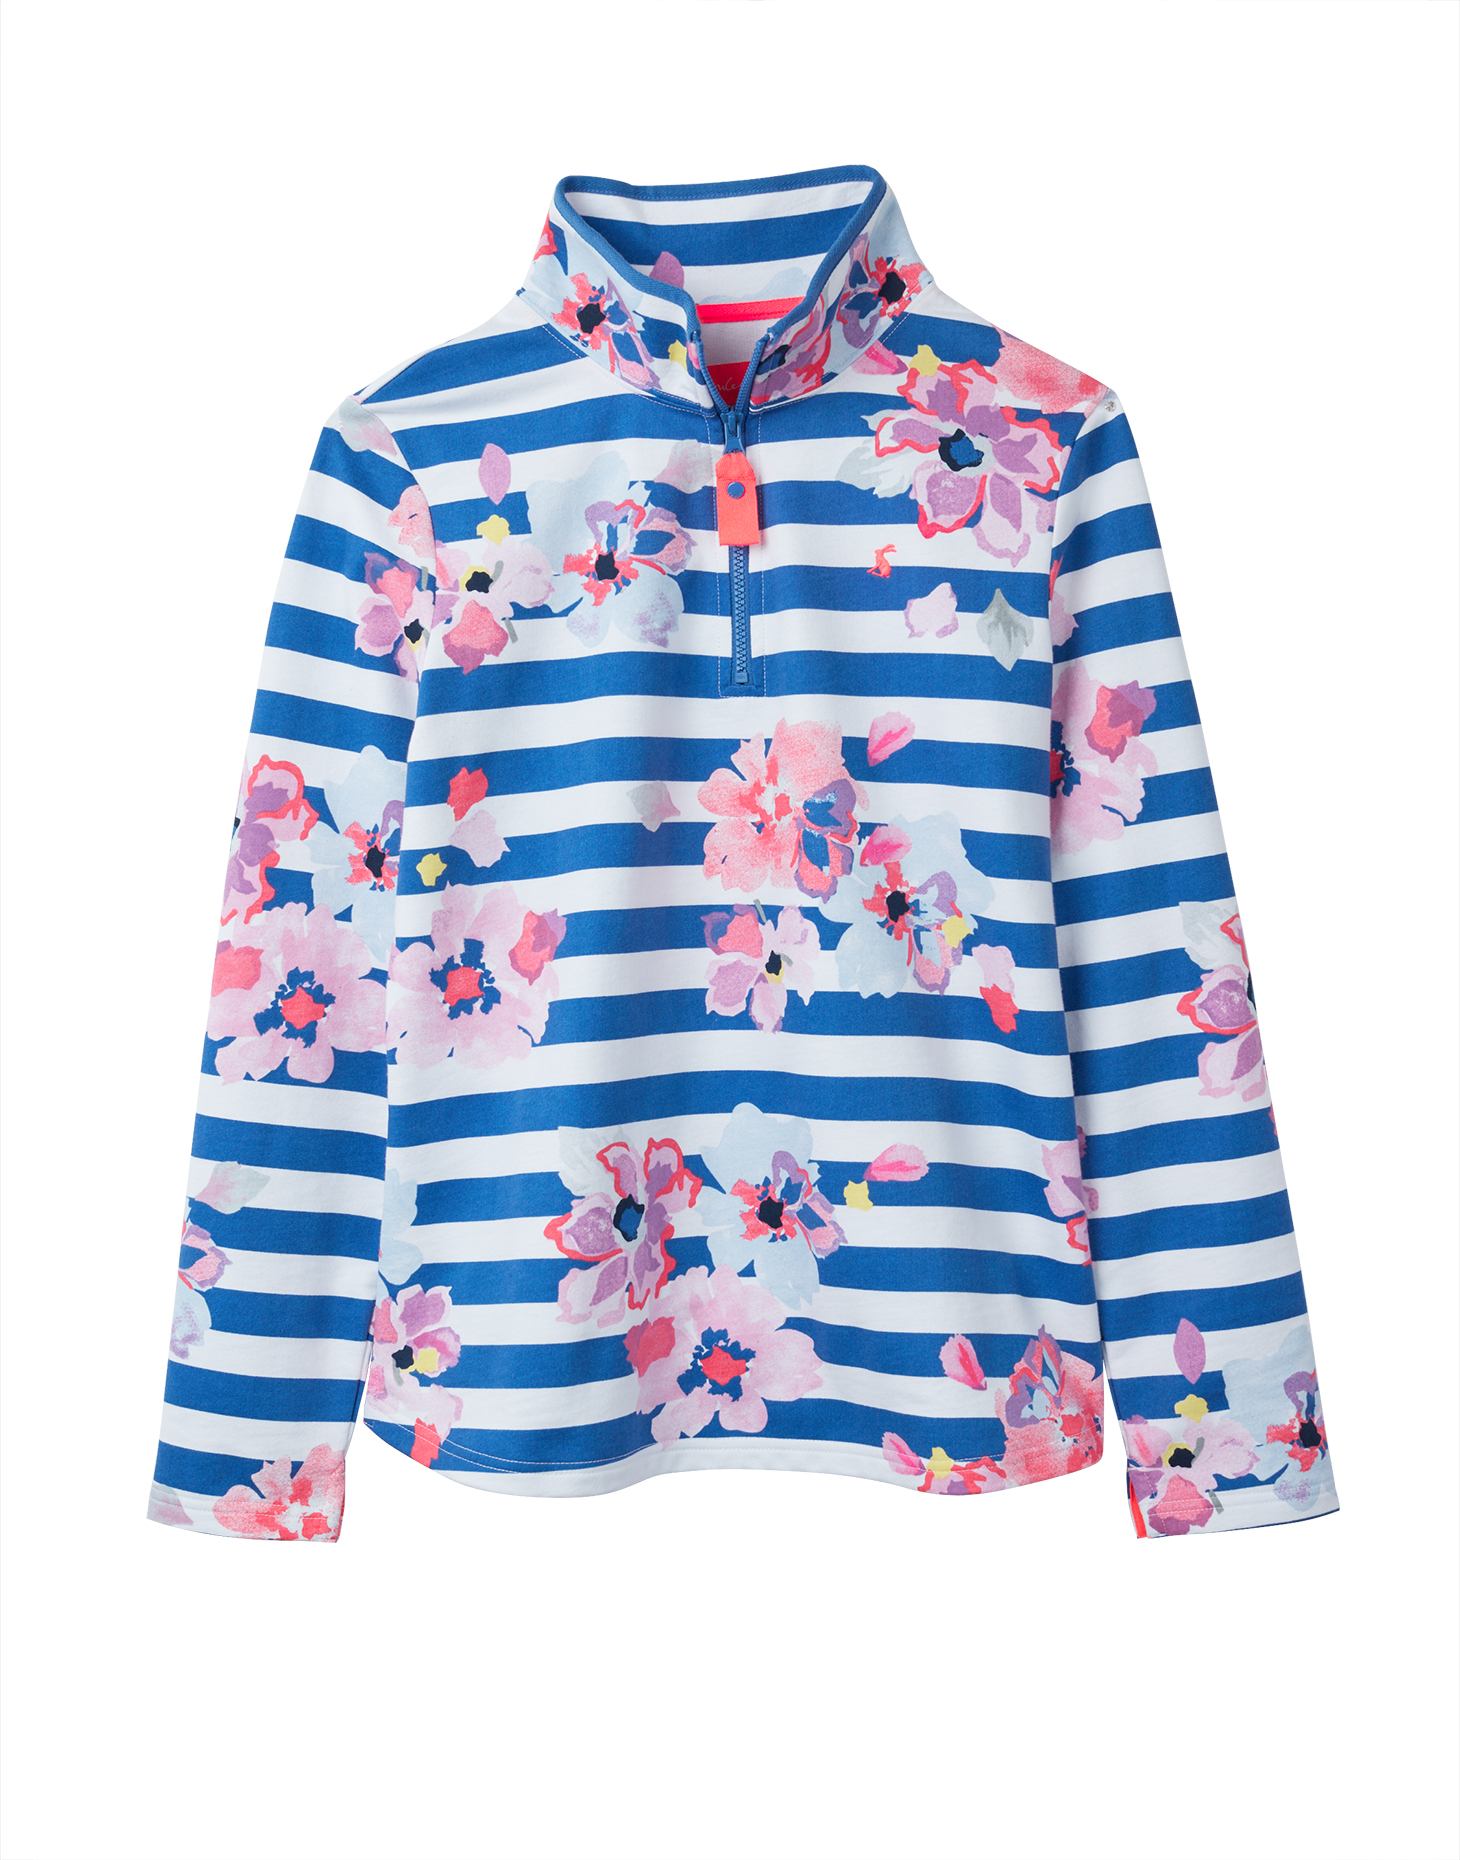 Joules Fairdale Printed Top